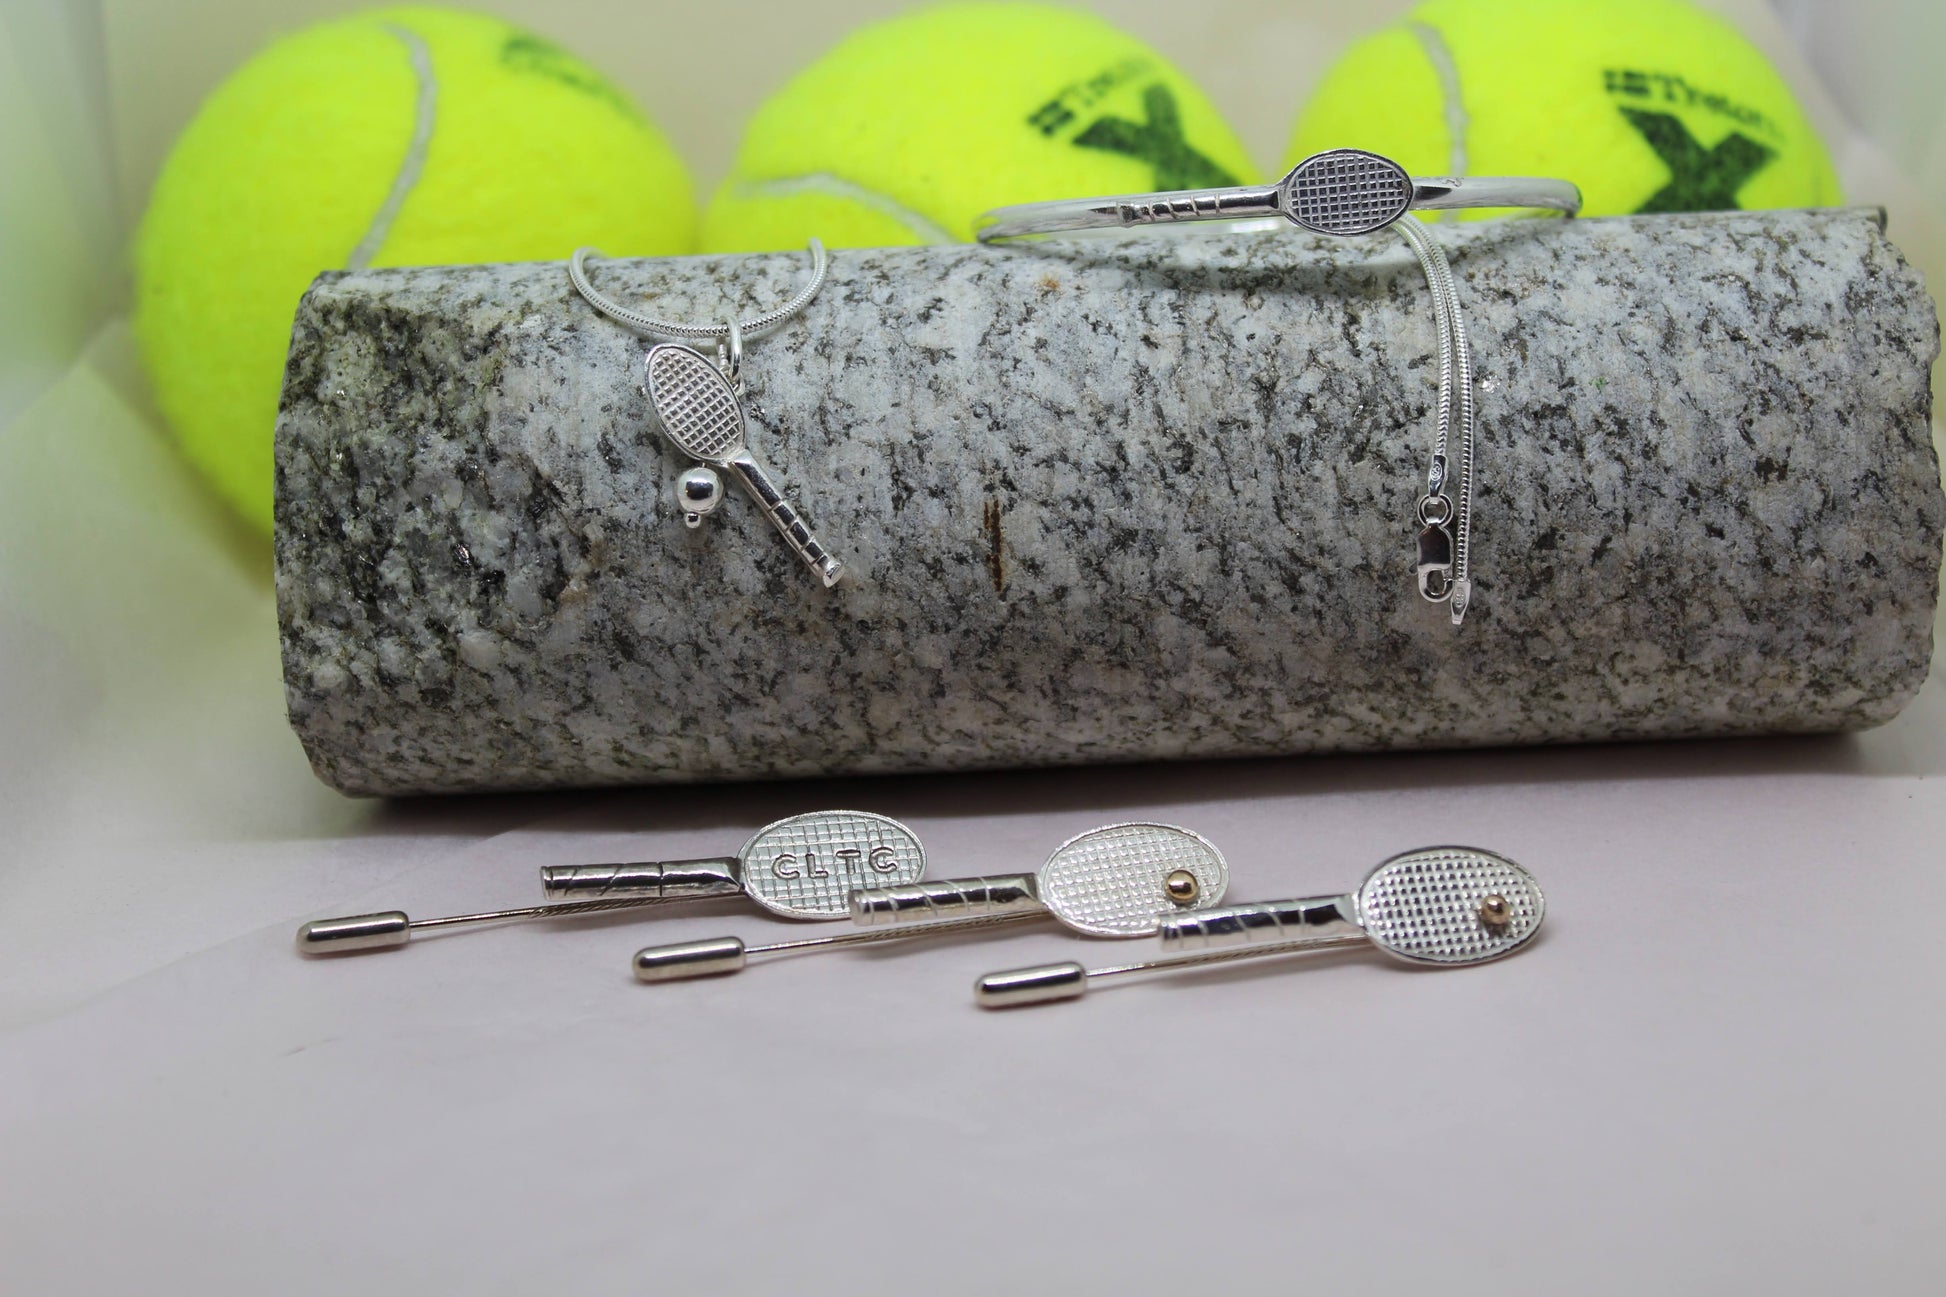 Handmade hand crafted sterling silver tennis bracelet bangle pictured with yellow tennis ball . Other items also available in the picture. Hit with me tennis necklace and tennis racket stick pins 